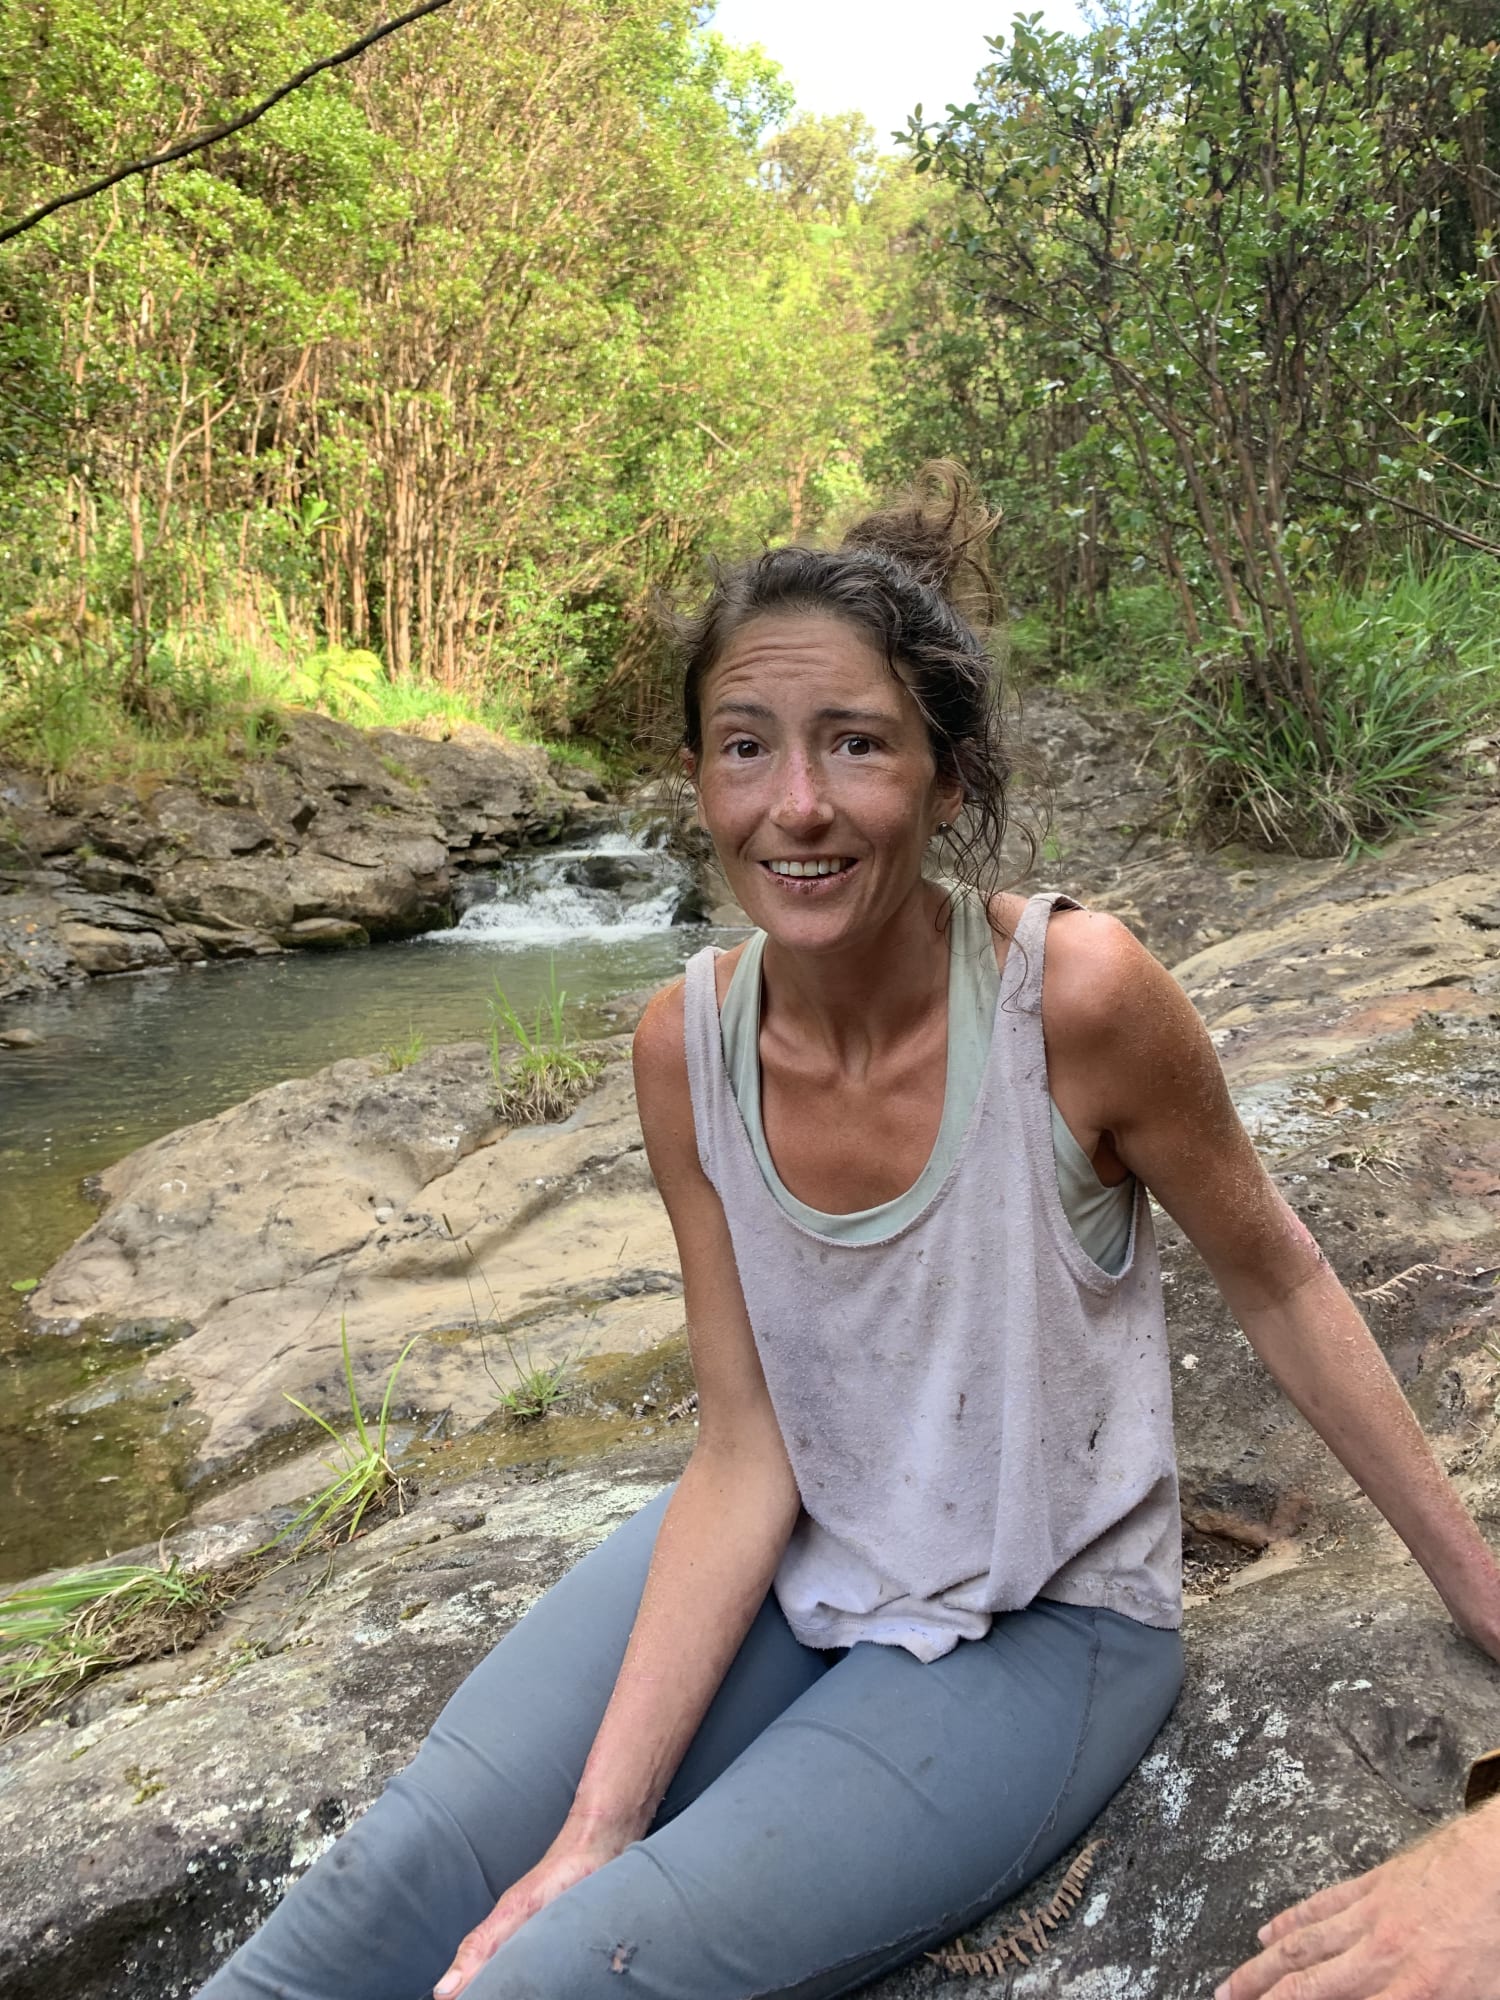 Missing Hawaii hiker says she 'chose life' after falling from